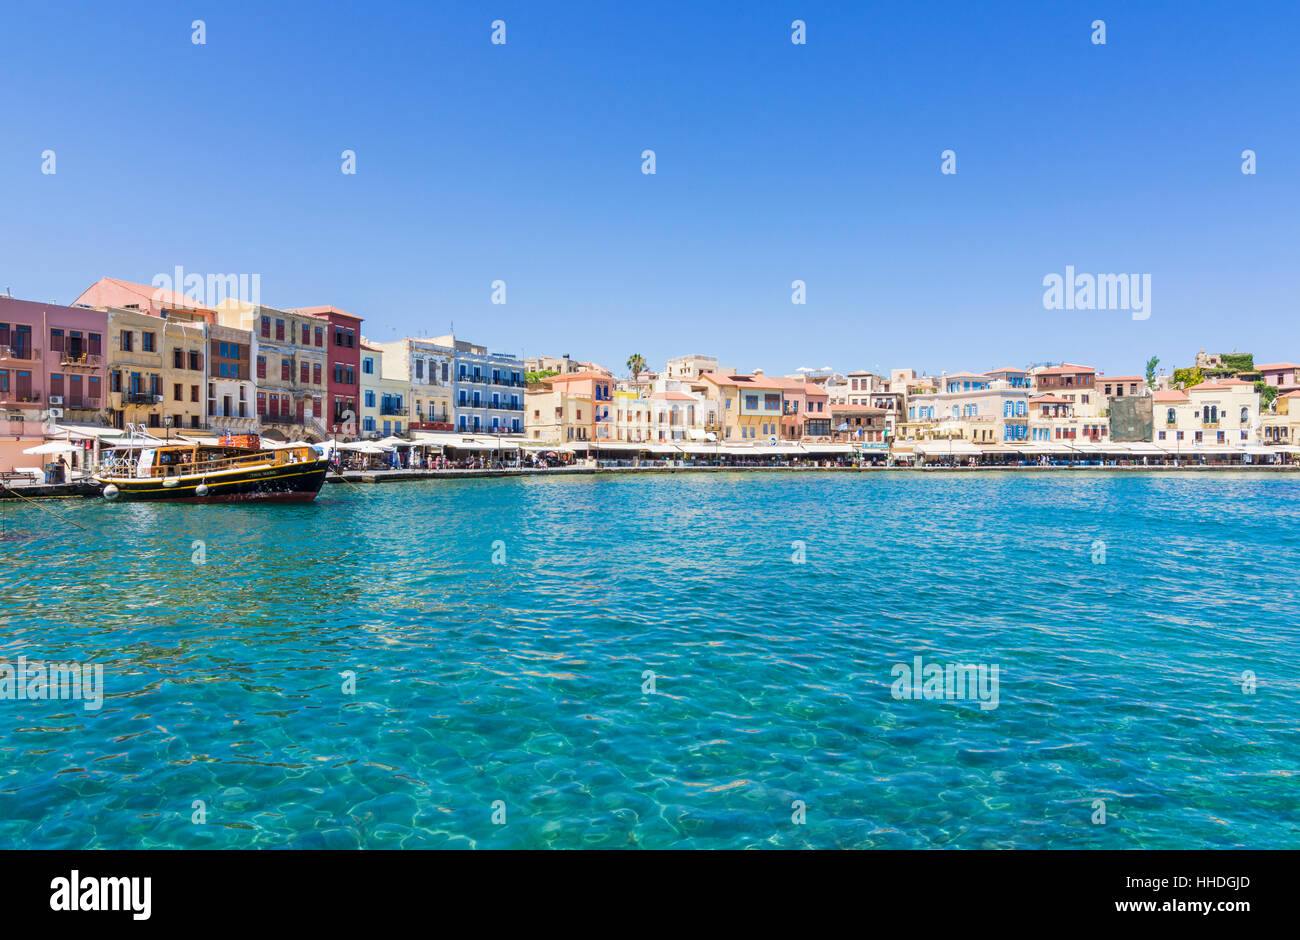 The waterfront promenade around the old outer Venetian harbour of Chania, Crete, Greece Stock Photo